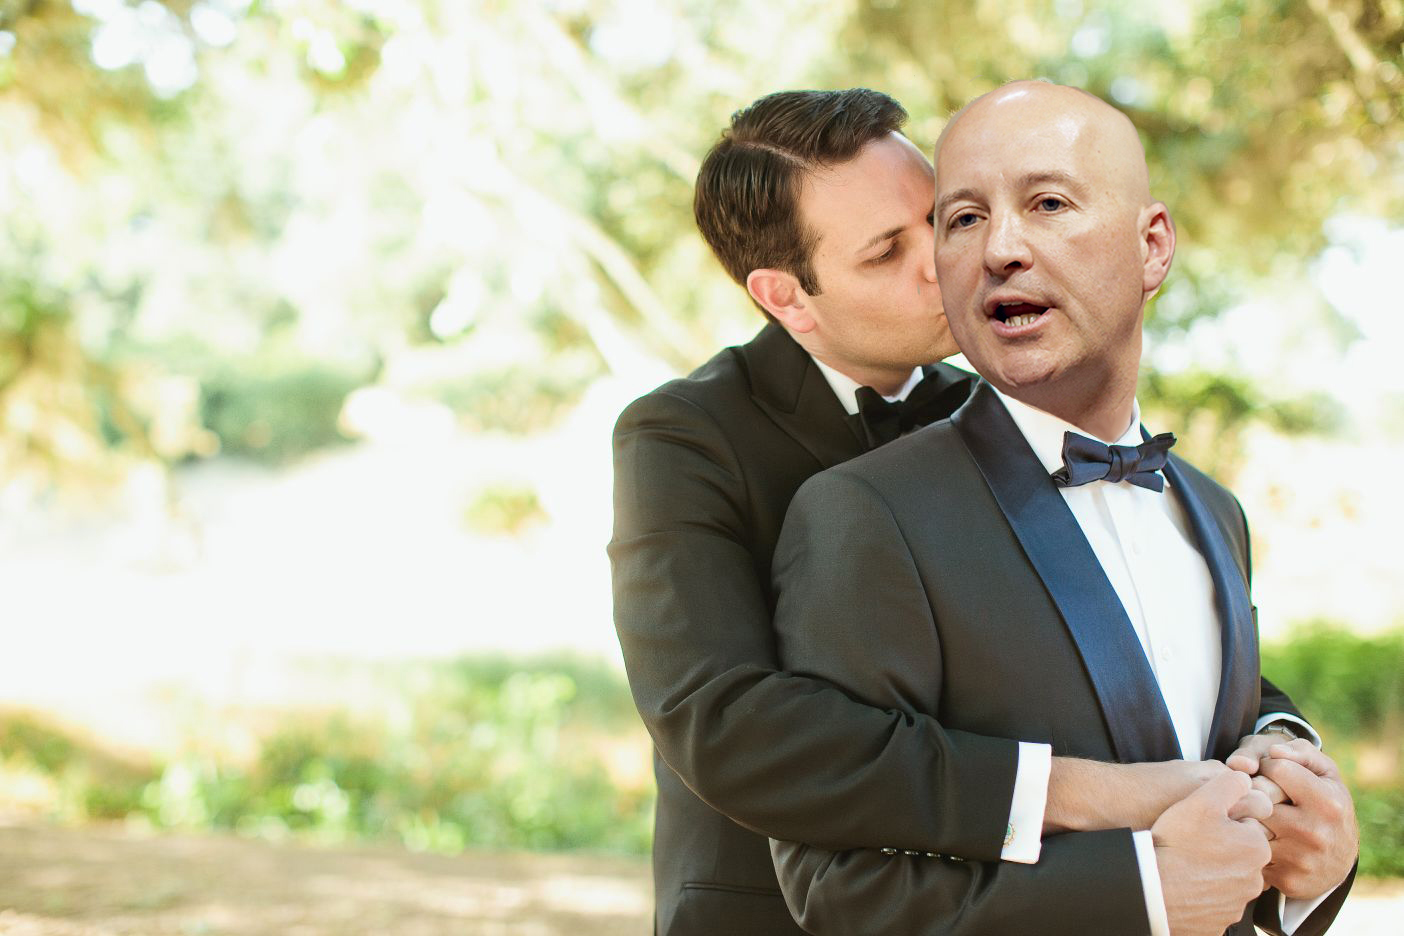 Pete Ricketts and boyfriend Steve Kandor pose embracing each other.